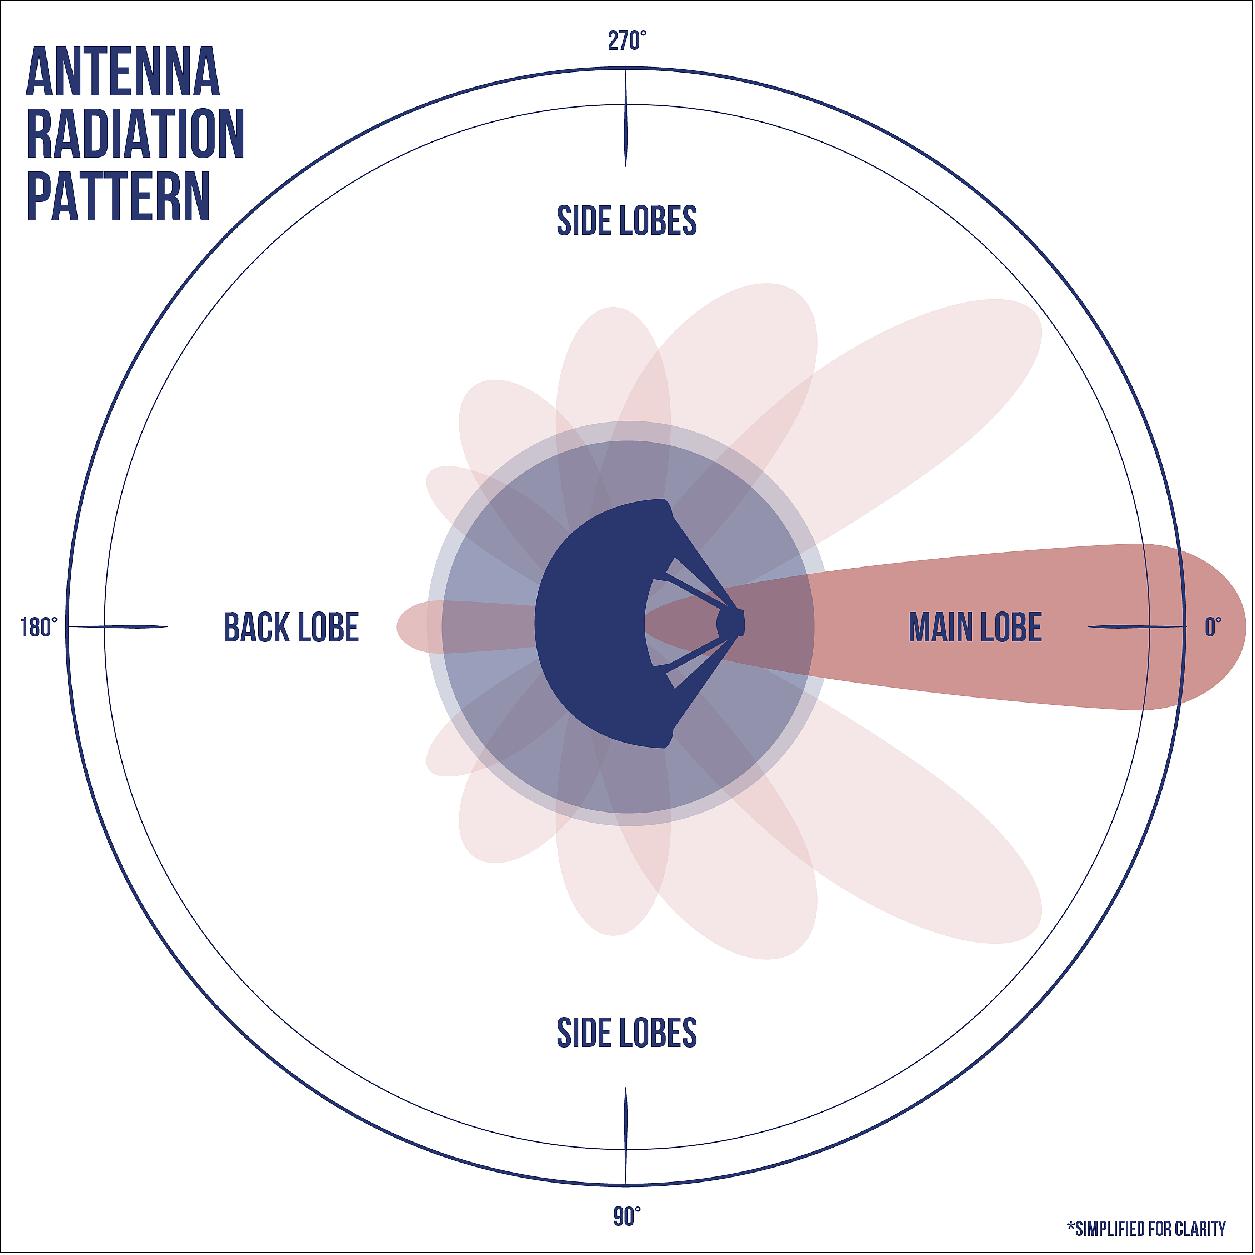 Figure 27: A simplified antenna radiation pattern with different lobes of radiation extending from the antenna. (image credit: NASA)